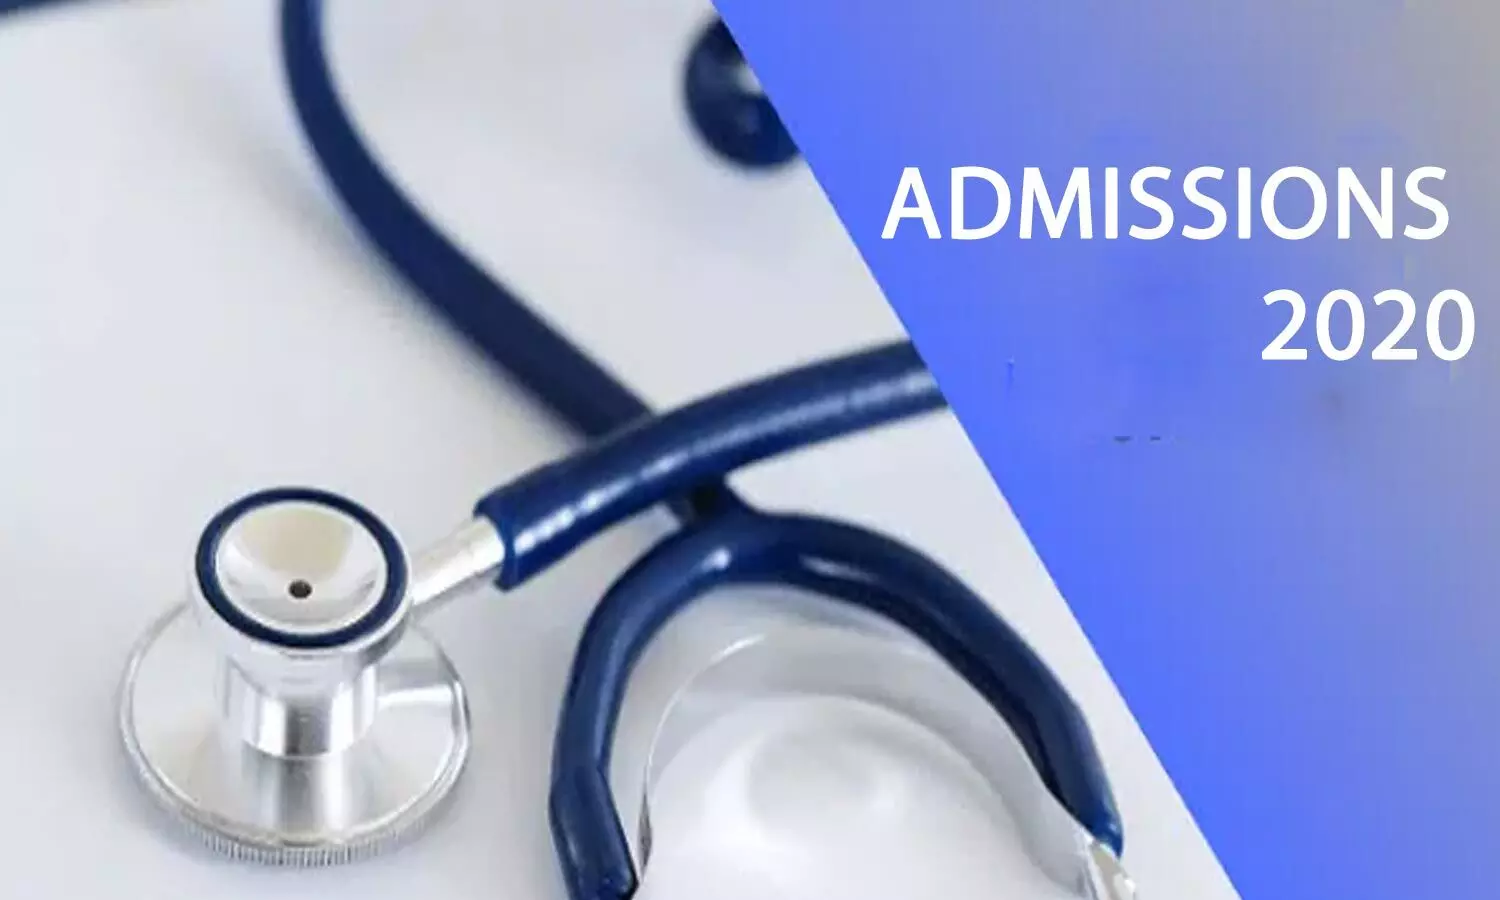 MBBS Admissions under Delhi Quota: MCC issues notice for CW Category Candidates